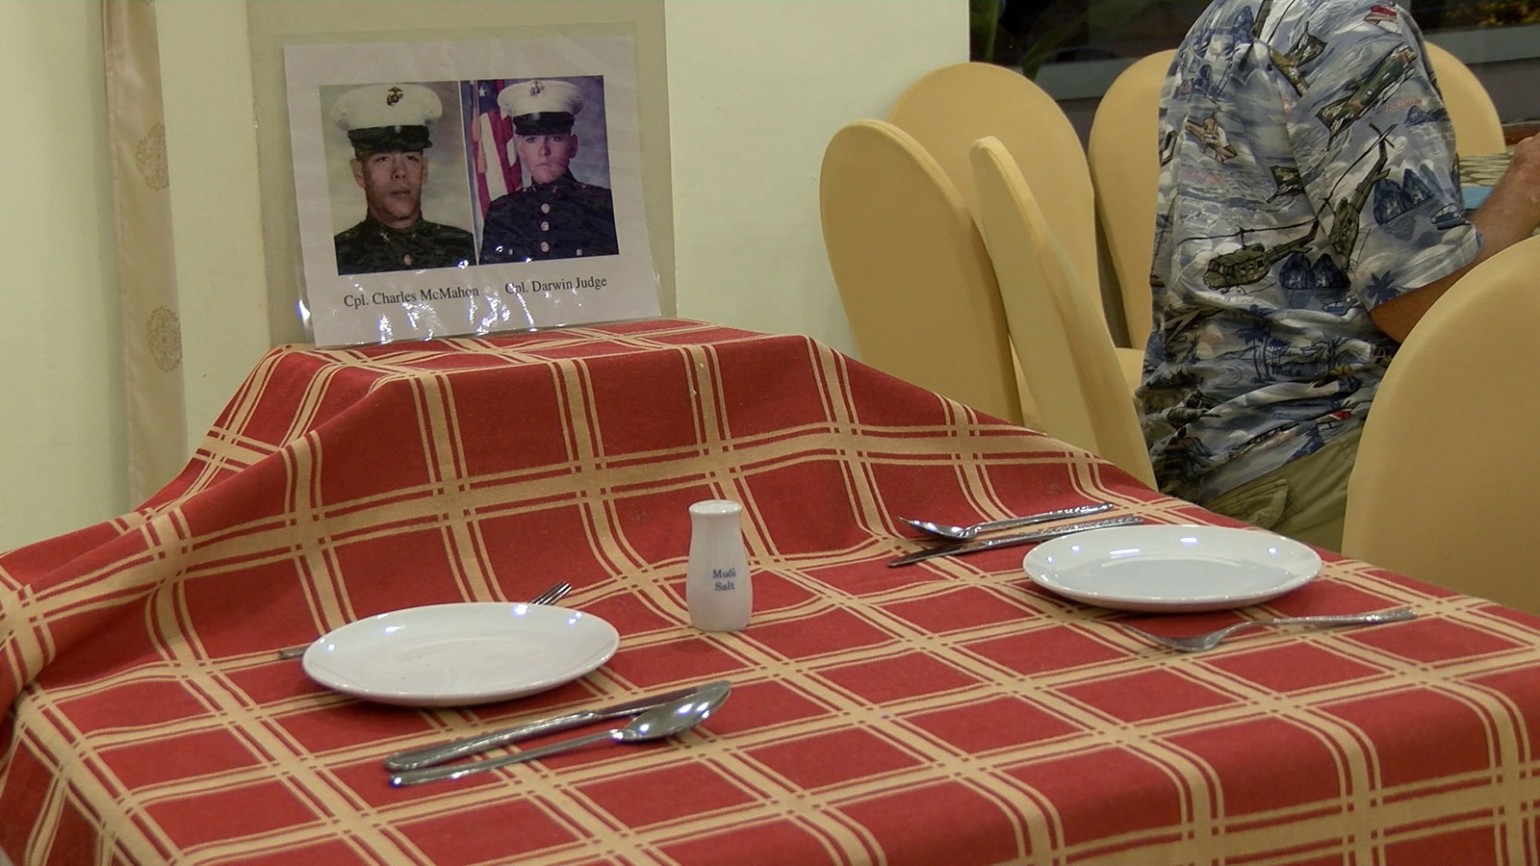 Table set for fallen friends Cpl. Charles McMahon and Cpl. Darwin Judge. Photo courtesy of Pat Clark.